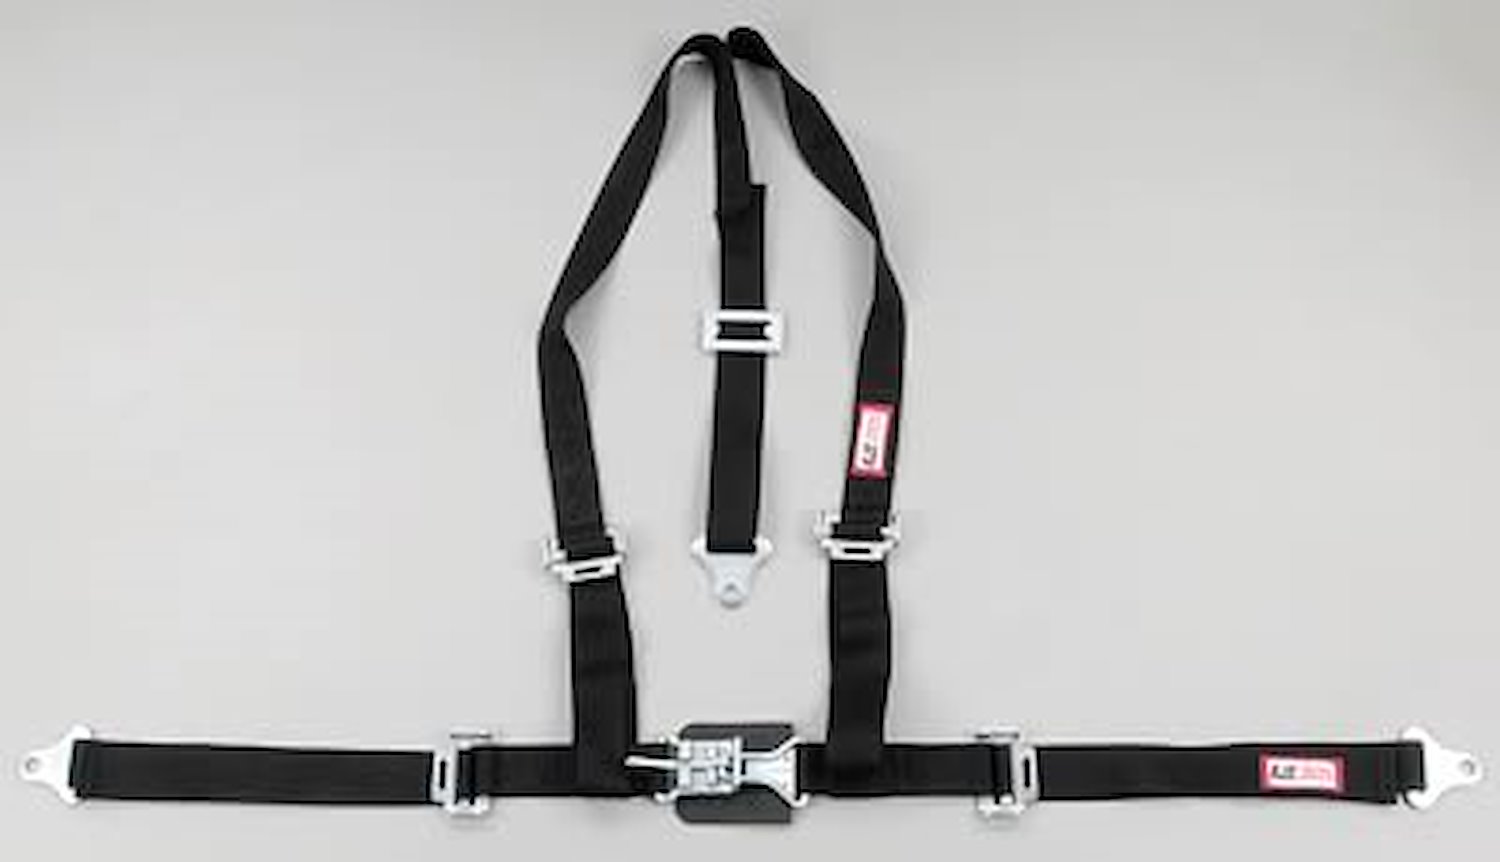 NON-SFI L&L HARNESS 2 PULL DOWN Lap Belt SNAP SEWN IN 2 S.H. Y FLOOR Mount WRAP/SNAP BLUE